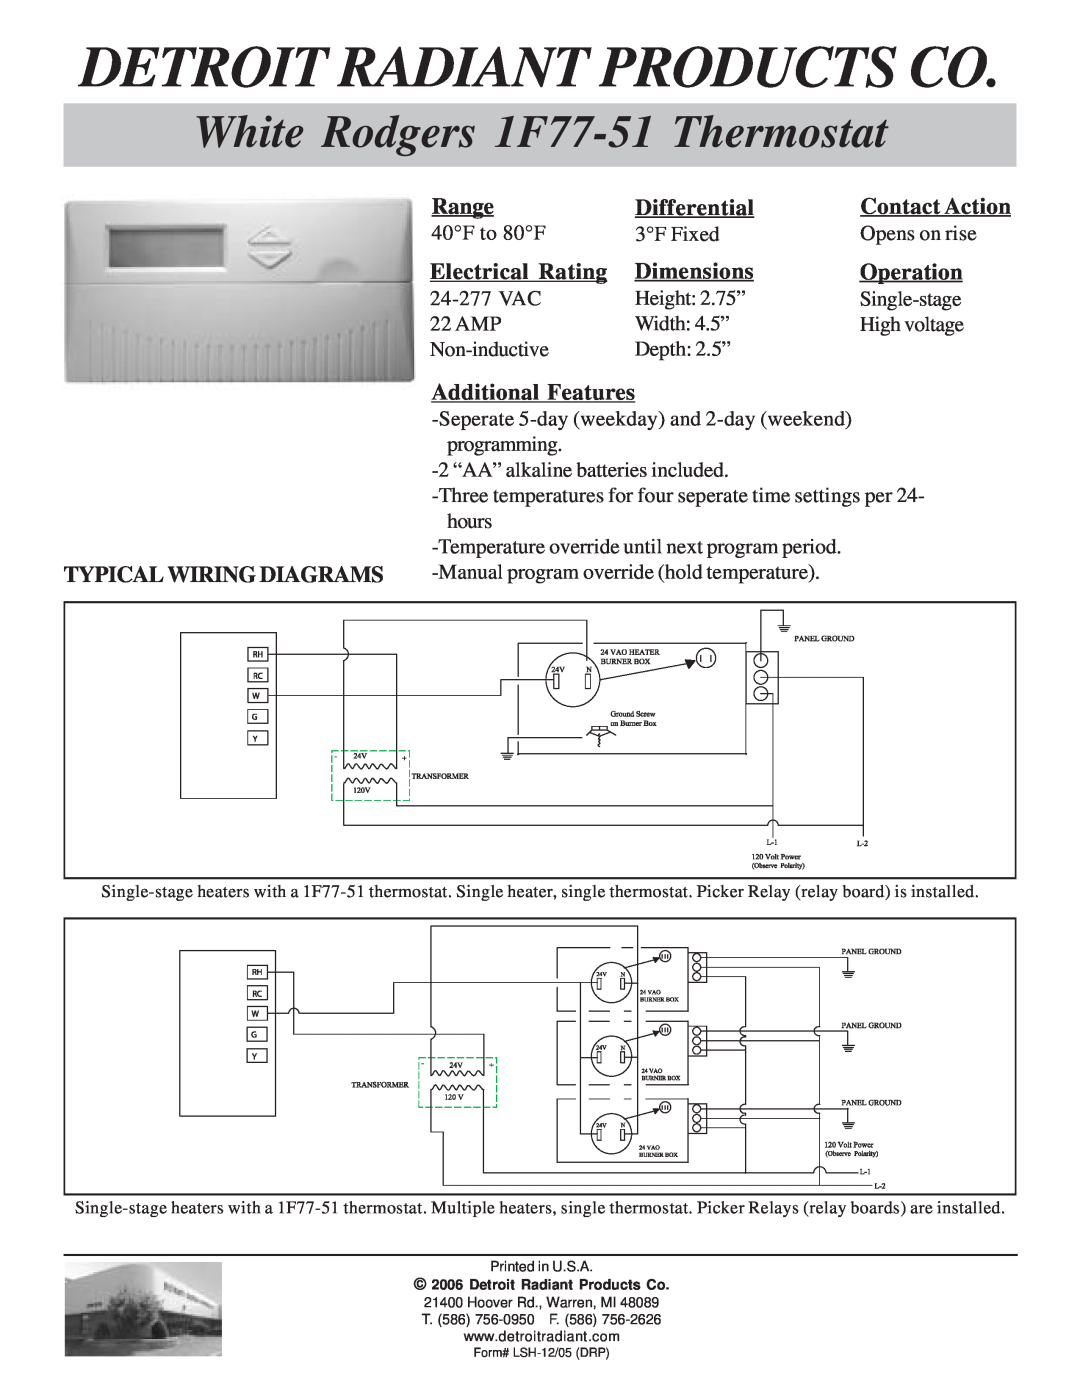 White Rodgers dimensions Detroit Radiant Products Co, White Rodgers 1F77-51 Thermostat, Range, Differential, Dimensions 